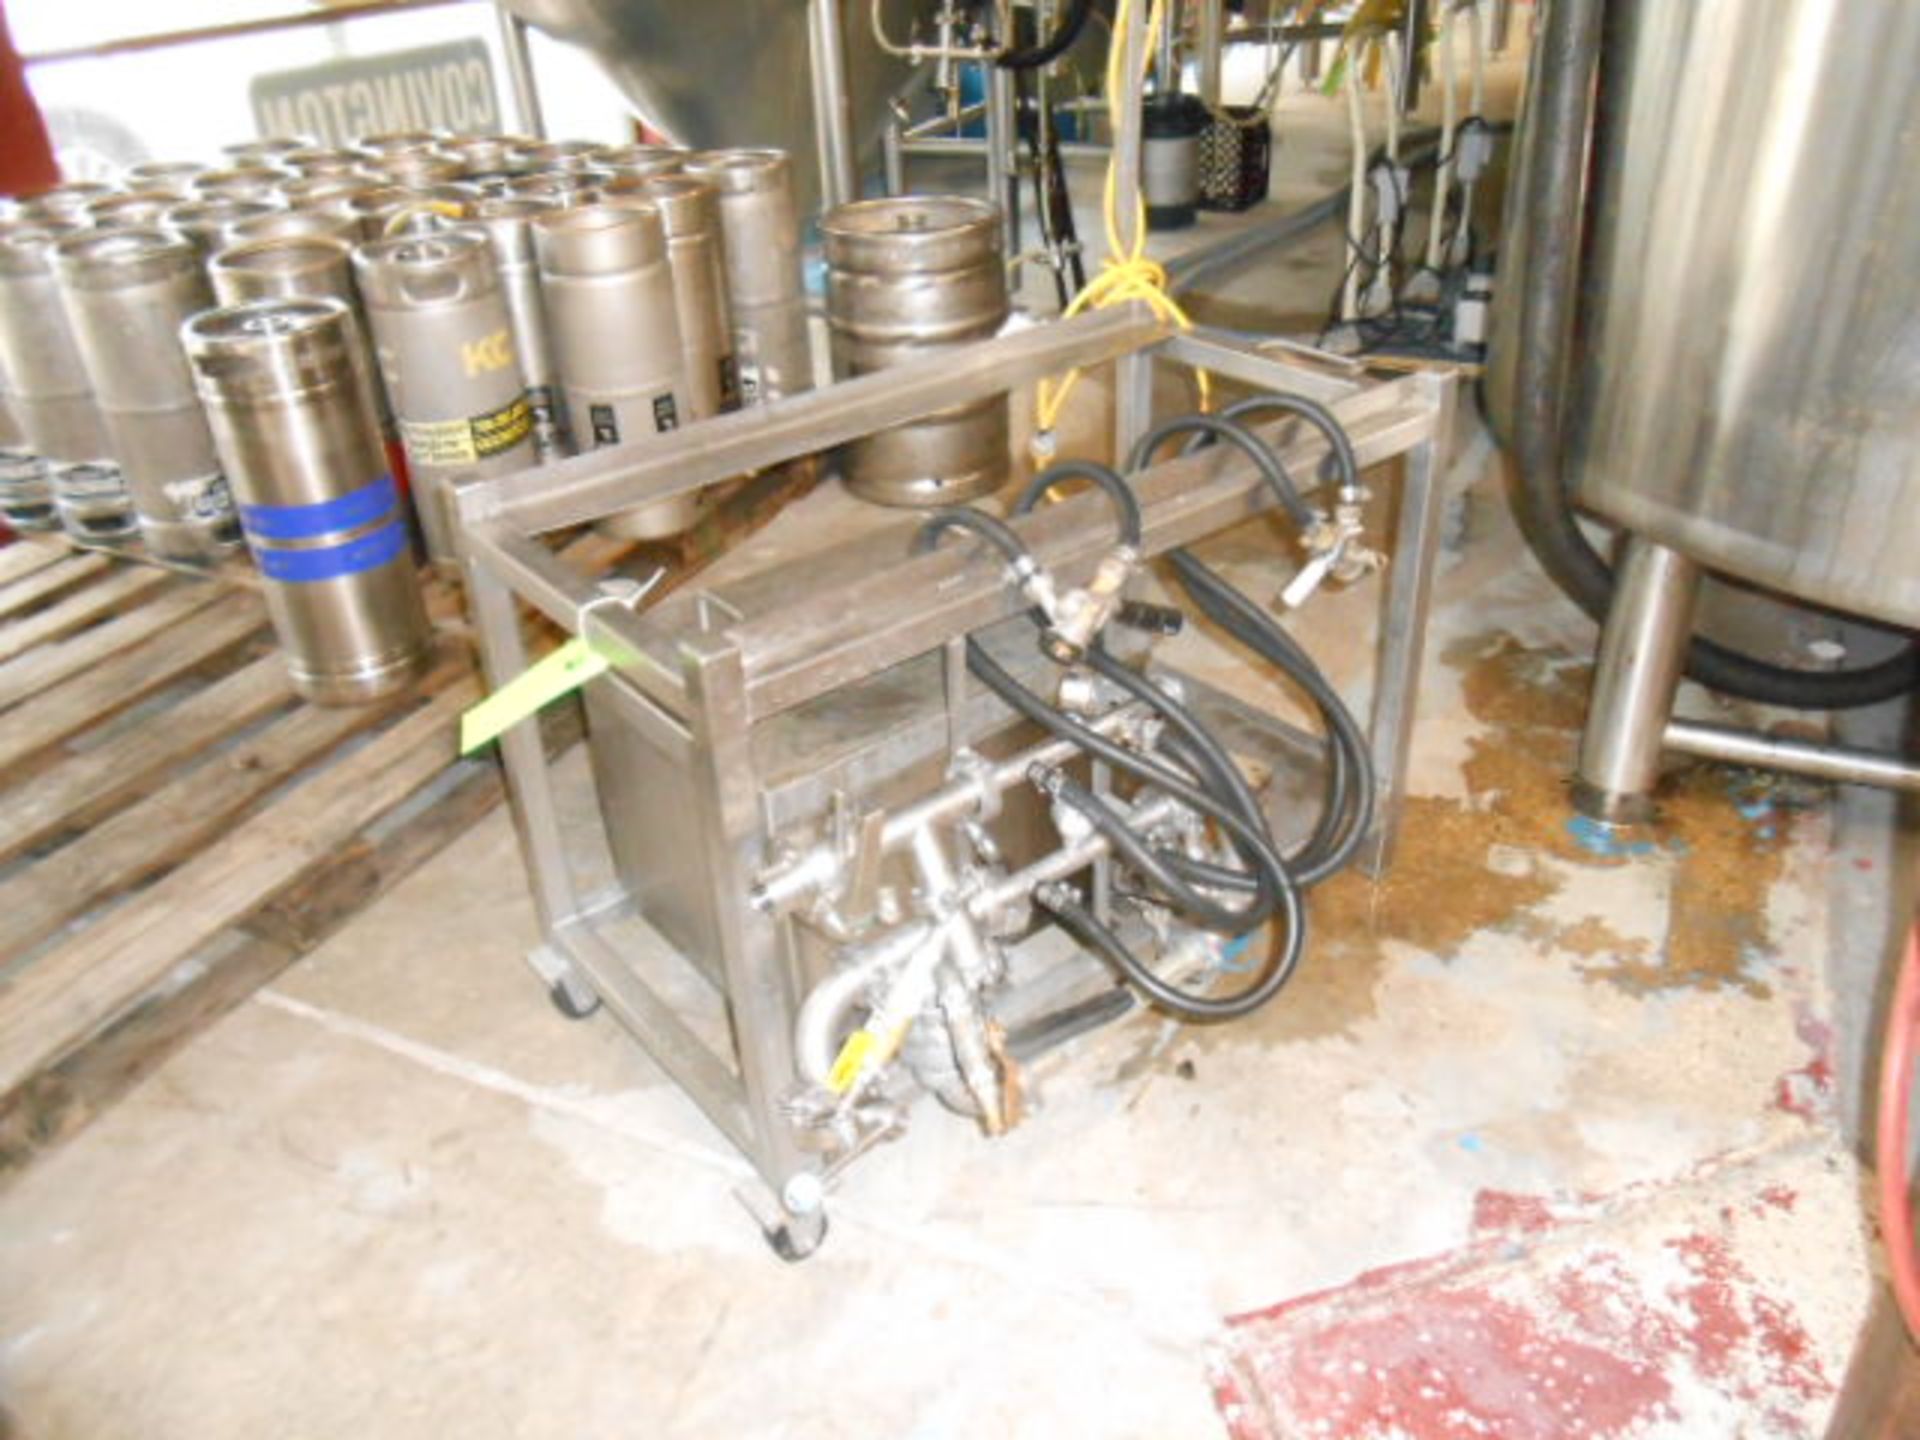 2 station keg washer with 20 in x 16 in x 20 deep tank, Sanke connections, REQUIRES PLANT